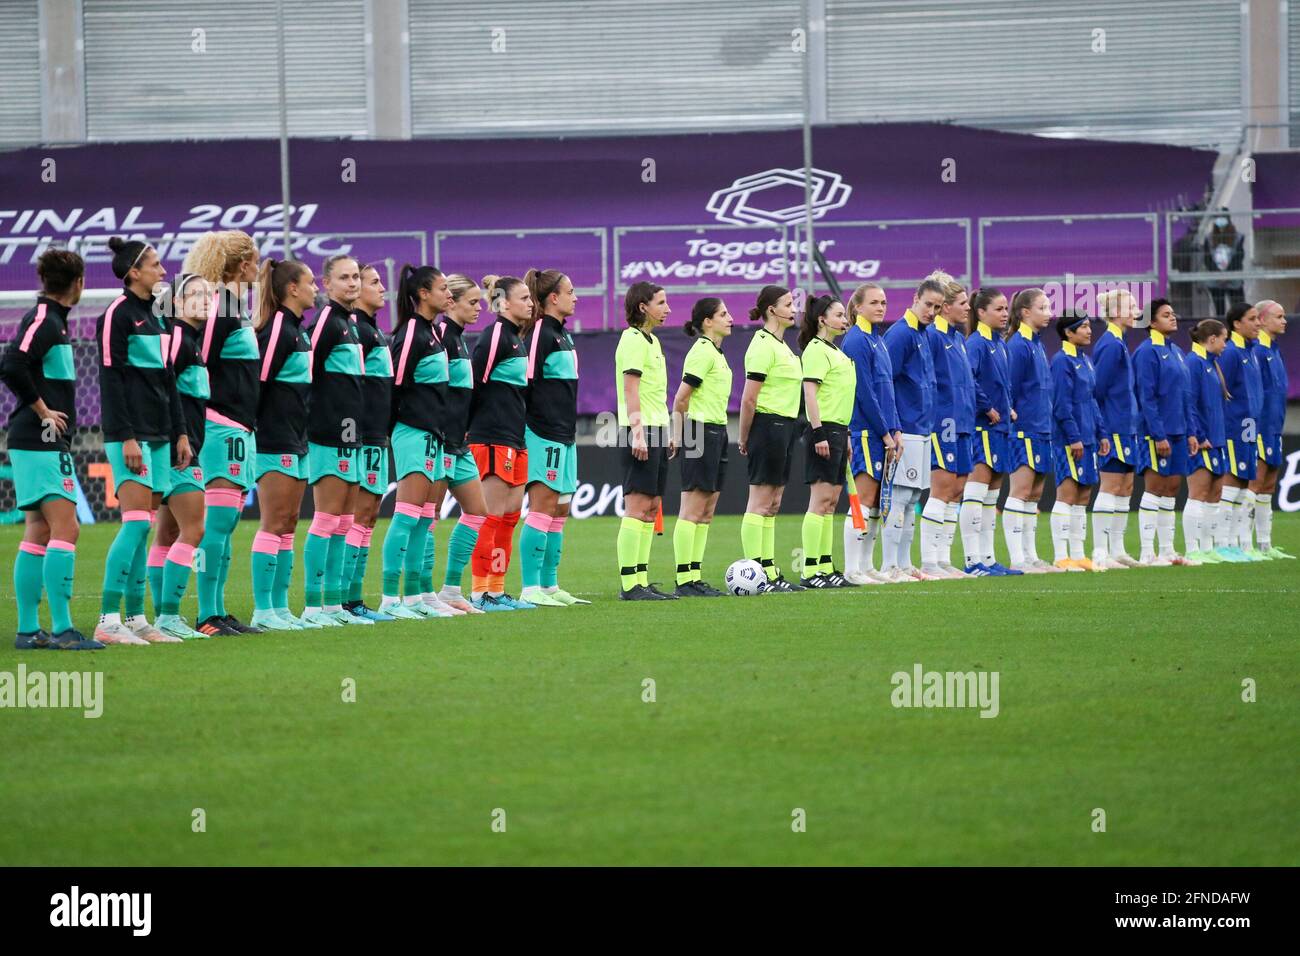 Gothenburg, Sweden. 16th May, 2021. Players of Chelsea and Players of Barcelona standing in line ahead of the UEFA Womens Champions League FINAL 2021between Chelsea FC and FC Barcelona at Gamla Ullevi